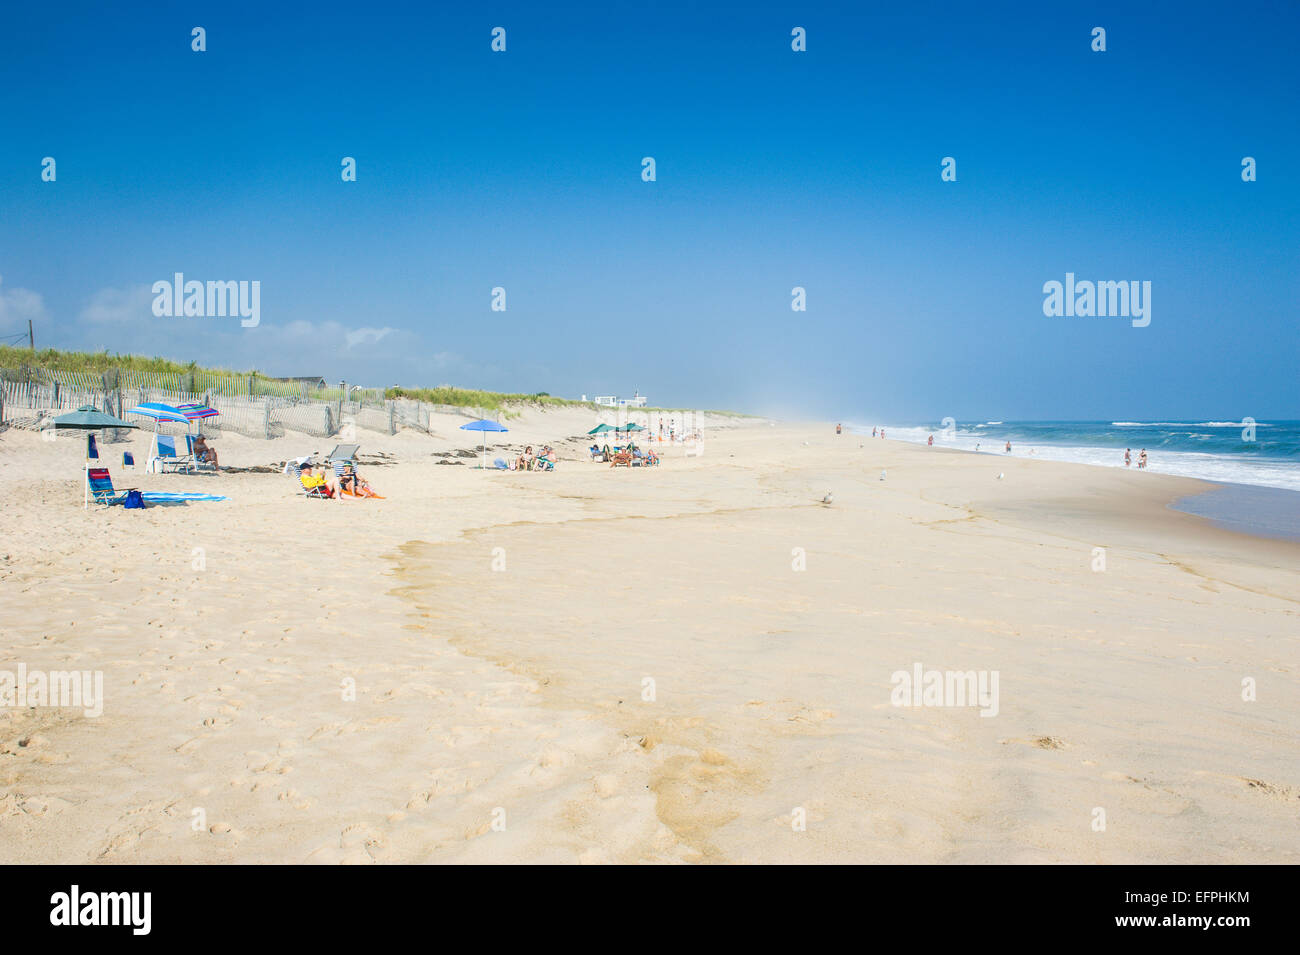 Long sandy beach in the Hamptons, Long Island, New York State, United States of America, North America Stock Photo